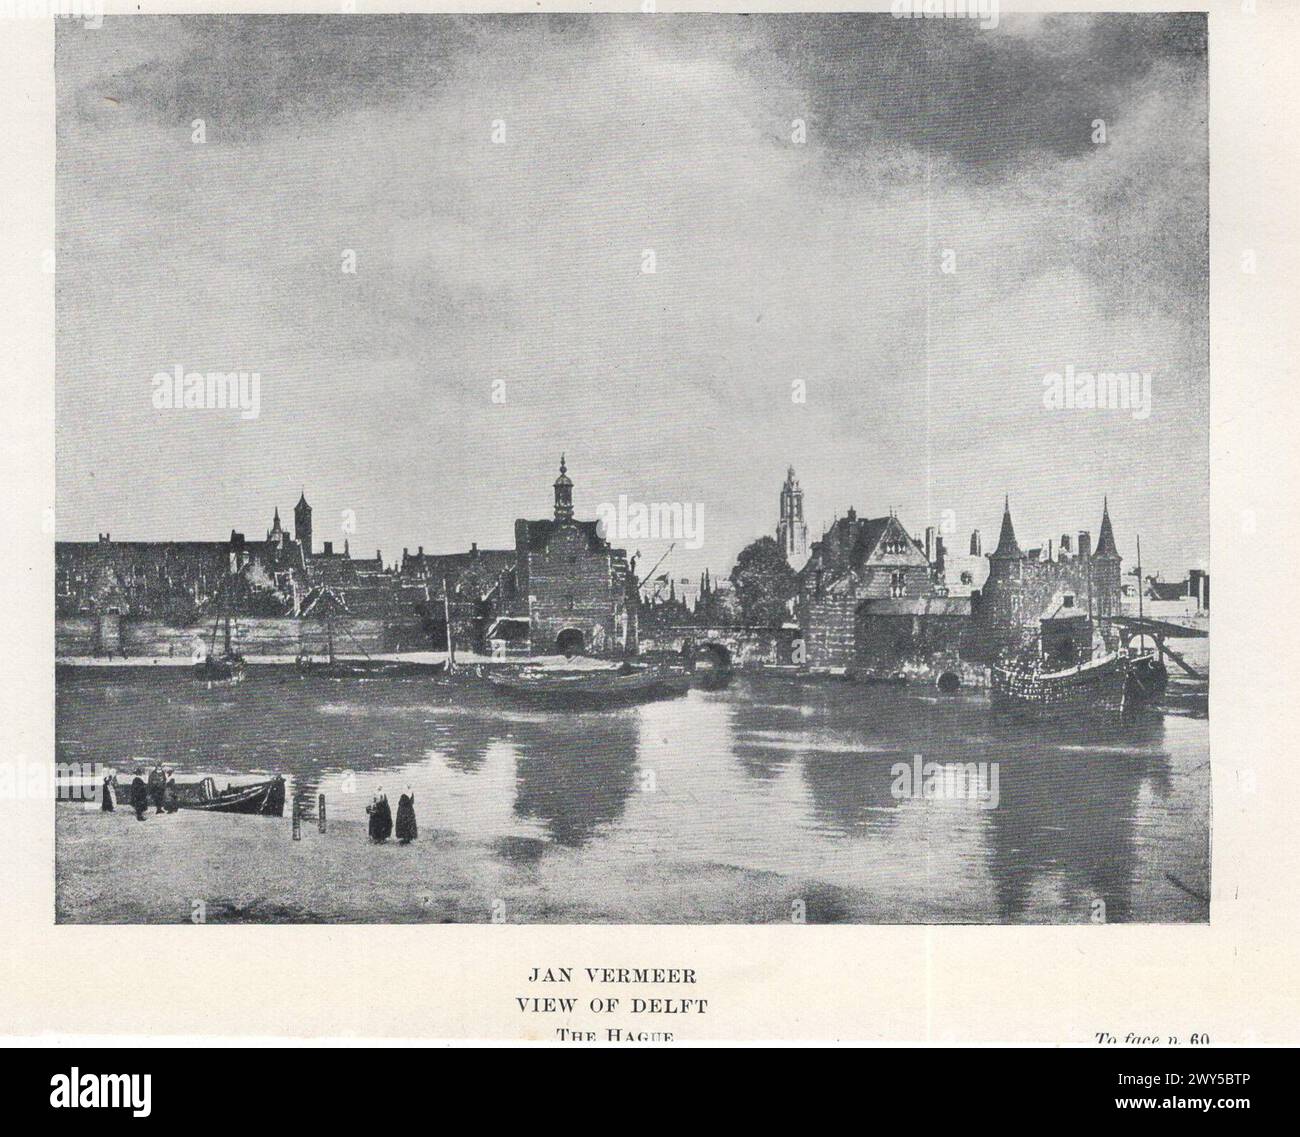 Great masters of Dutch and Flemish painting by W. Done translated by Margaret L. Clarke , London : Duckworth and Co. New York : Charles Scribner's sons 1909 / Jan Vermeer : View of Delft , The Hague Stock Photo